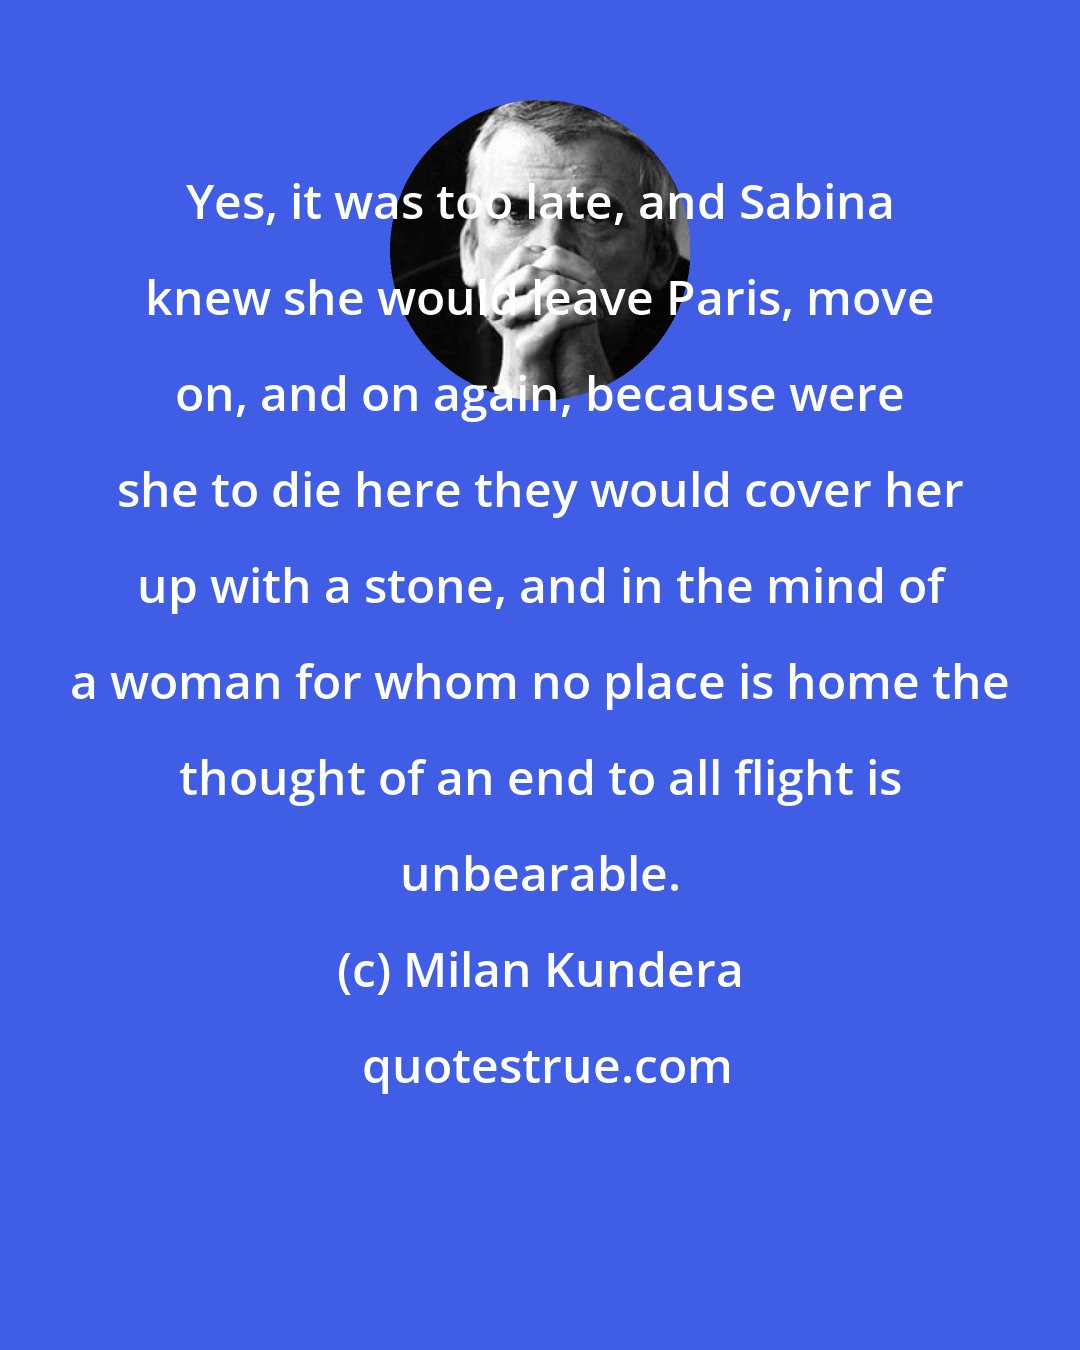 Milan Kundera: Yes, it was too late, and Sabina knew she would leave Paris, move on, and on again, because were she to die here they would cover her up with a stone, and in the mind of a woman for whom no place is home the thought of an end to all flight is unbearable.